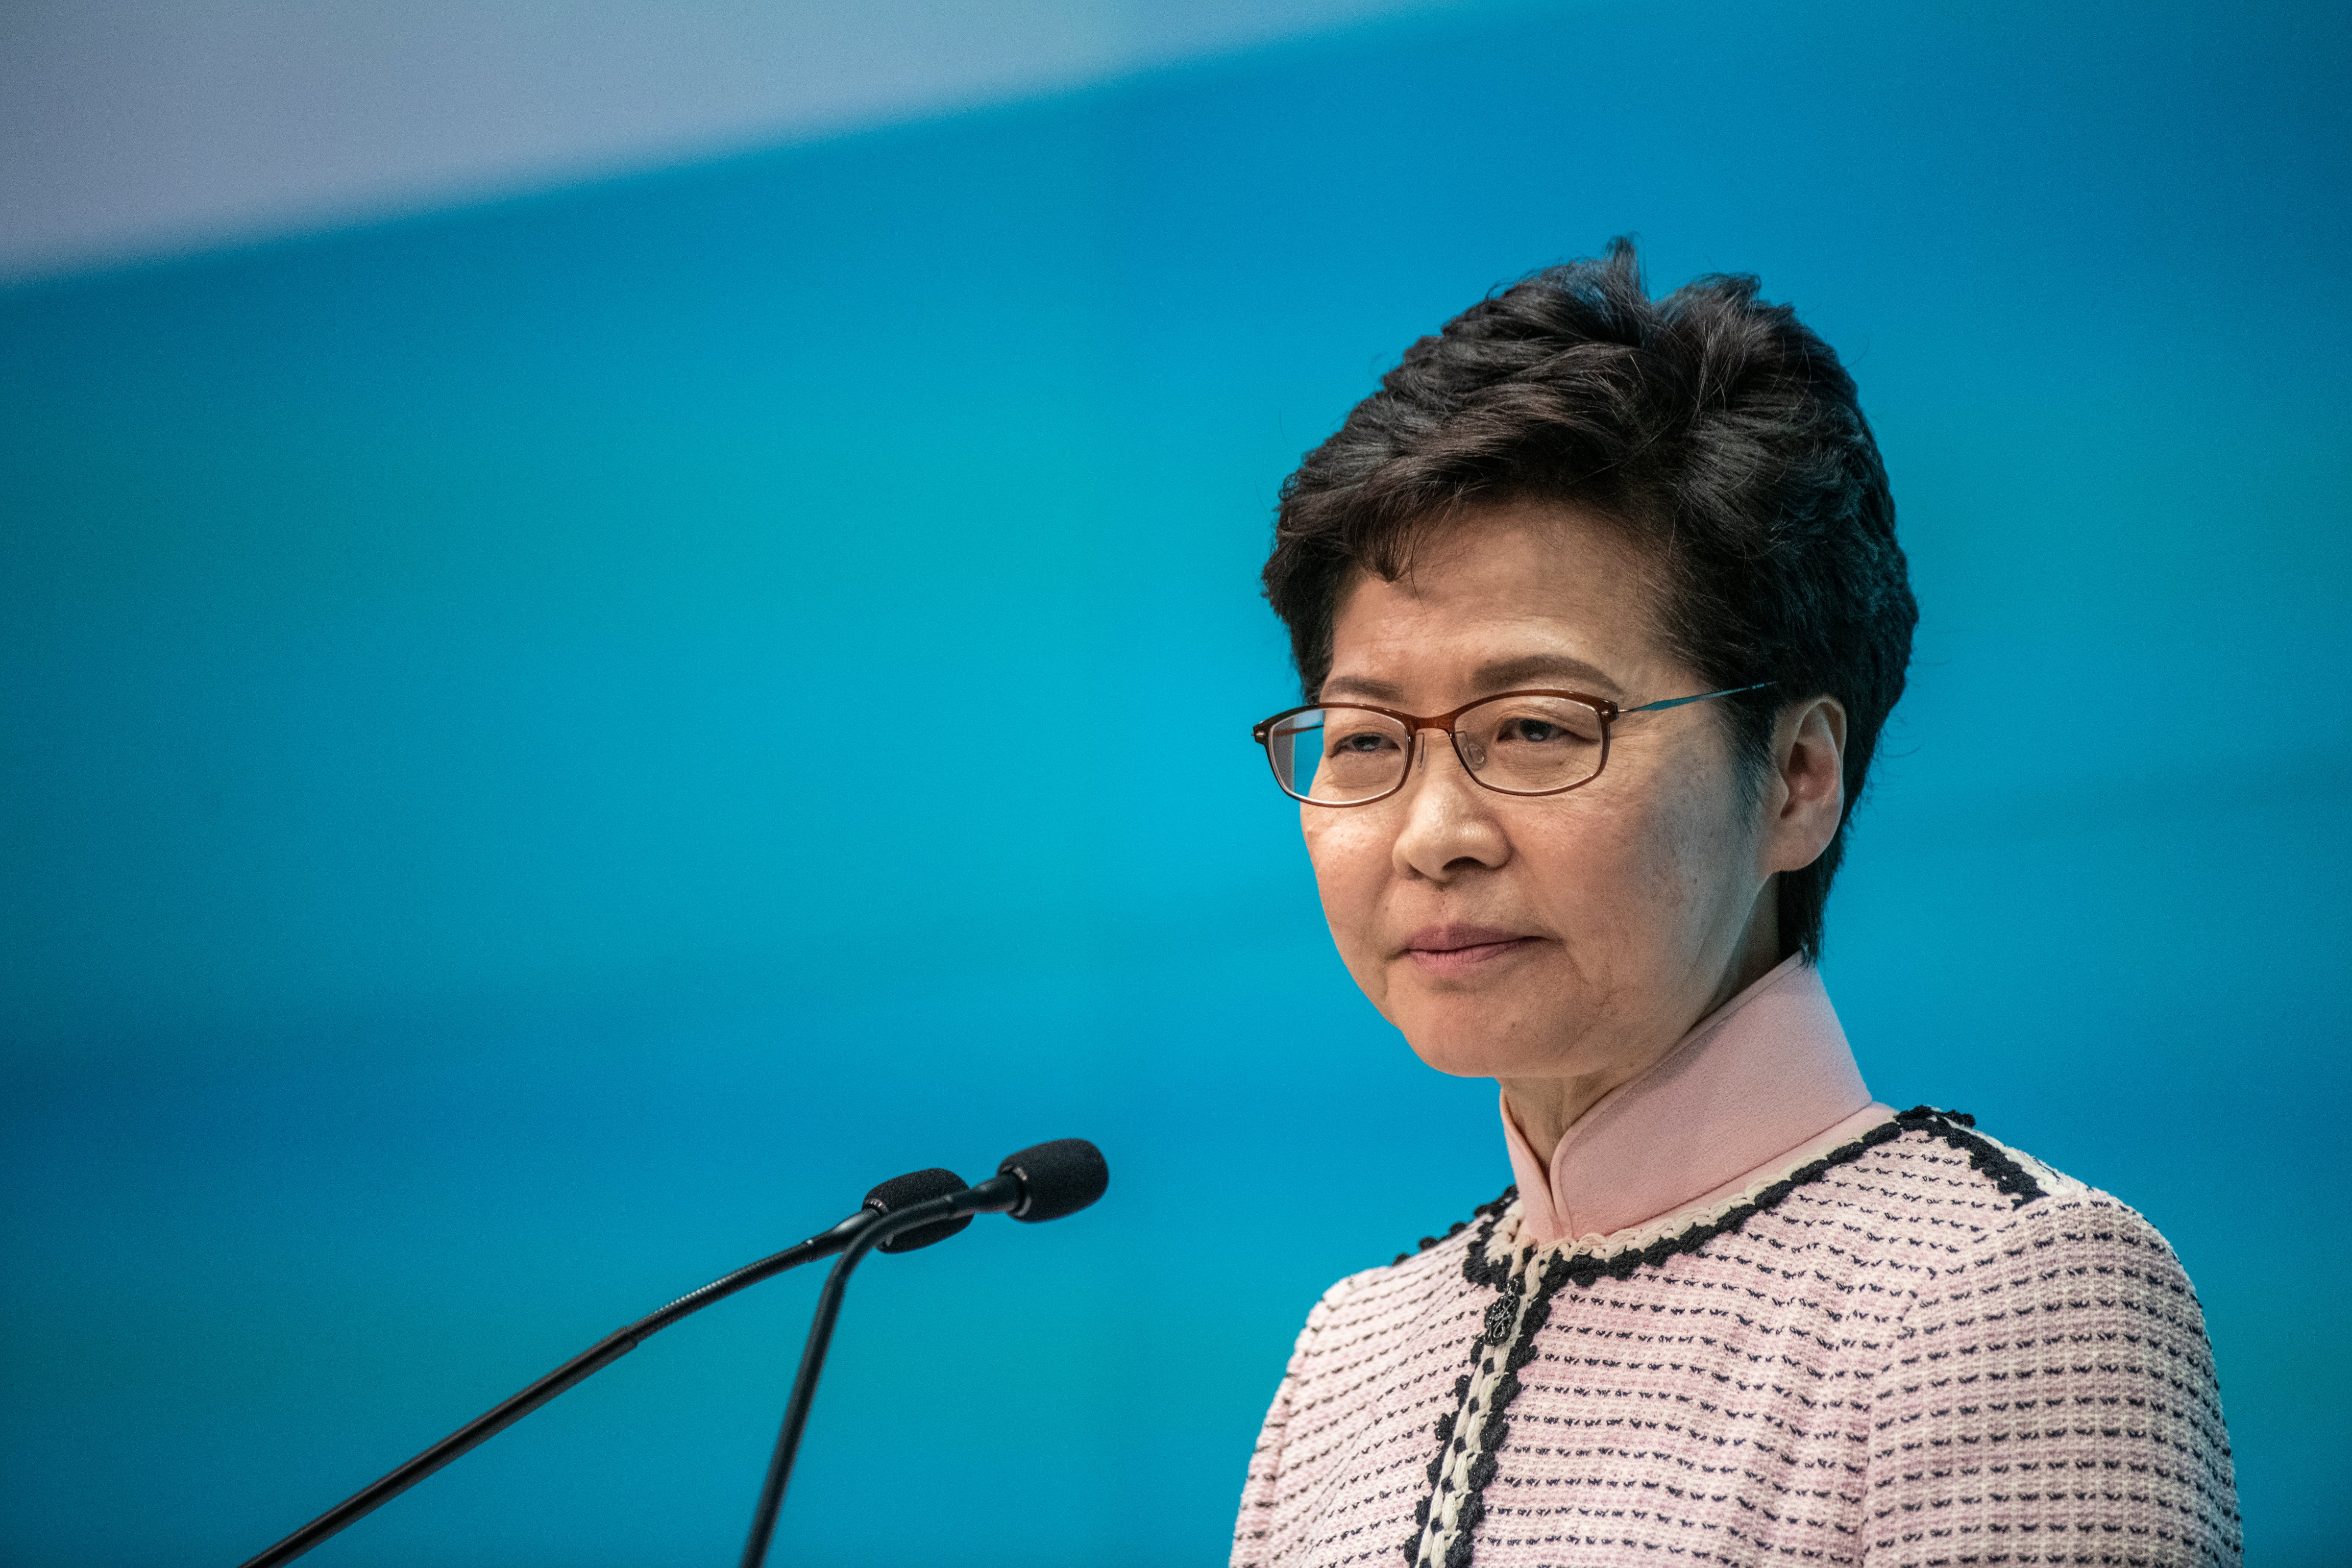 Hong Kong Chief Executive Carrie Lam Helps First Home Buyers As Inequality Fuels Unrest